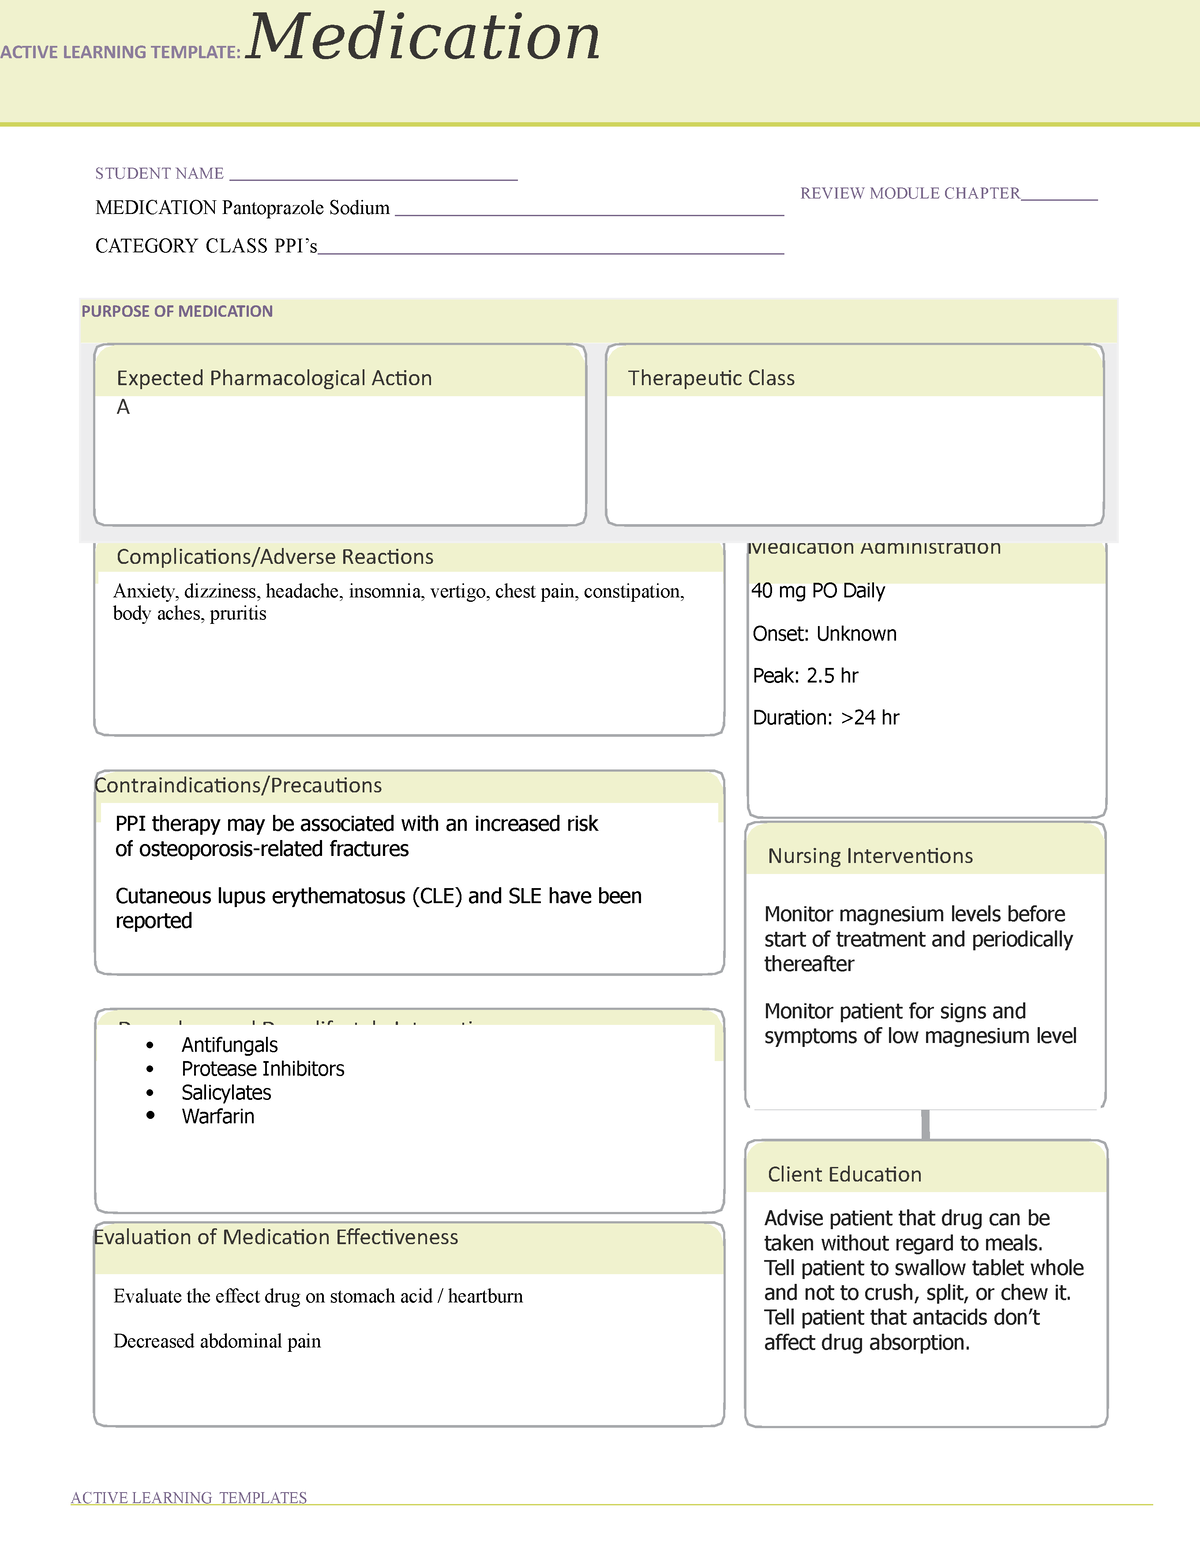 medications-pantoprazole-ati-med-form-active-learning-template